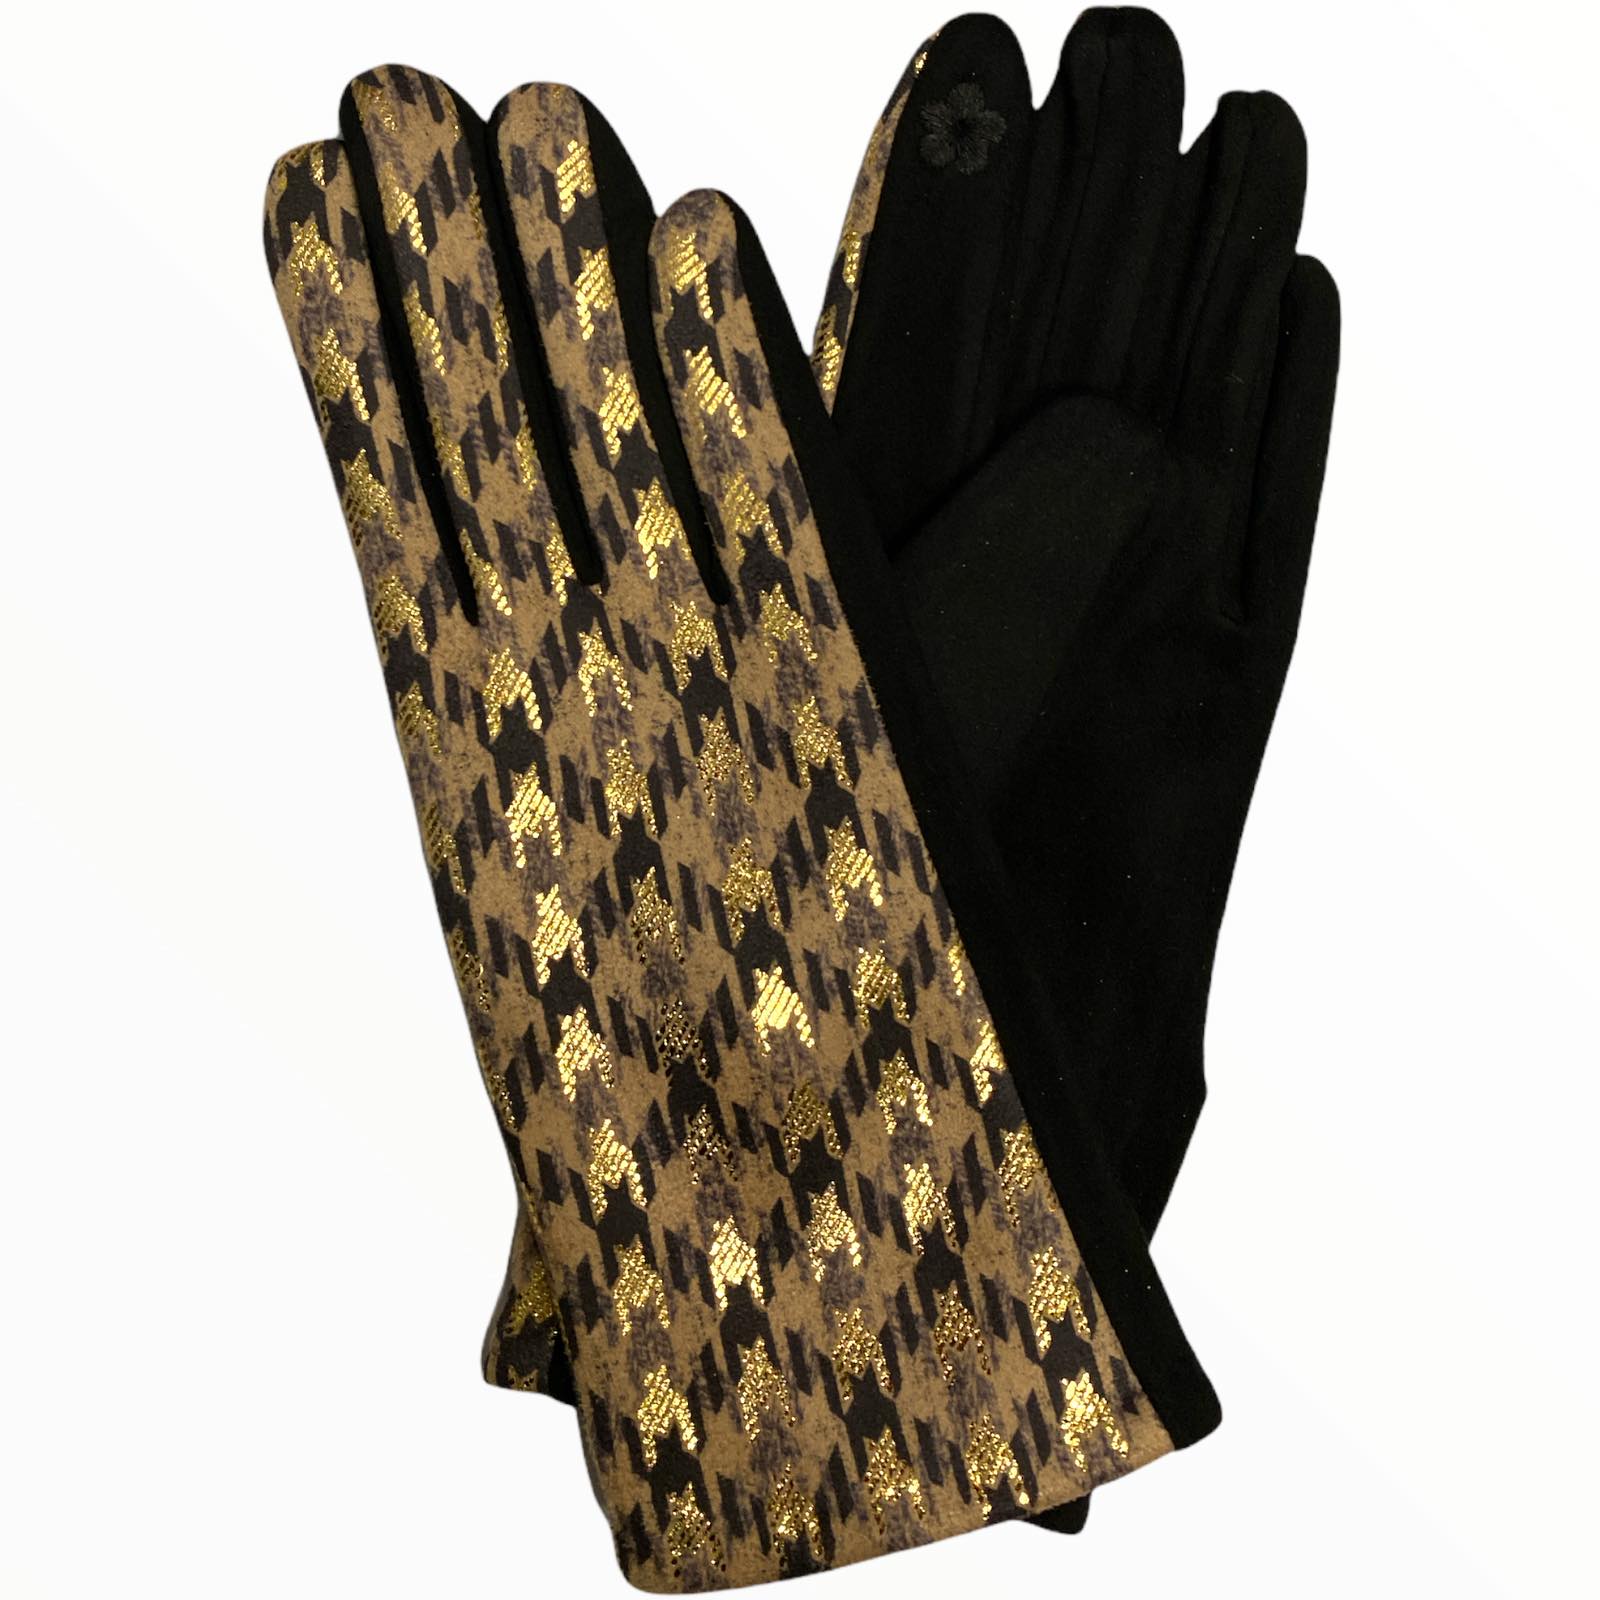 Chic taupe and black gloves with gold details